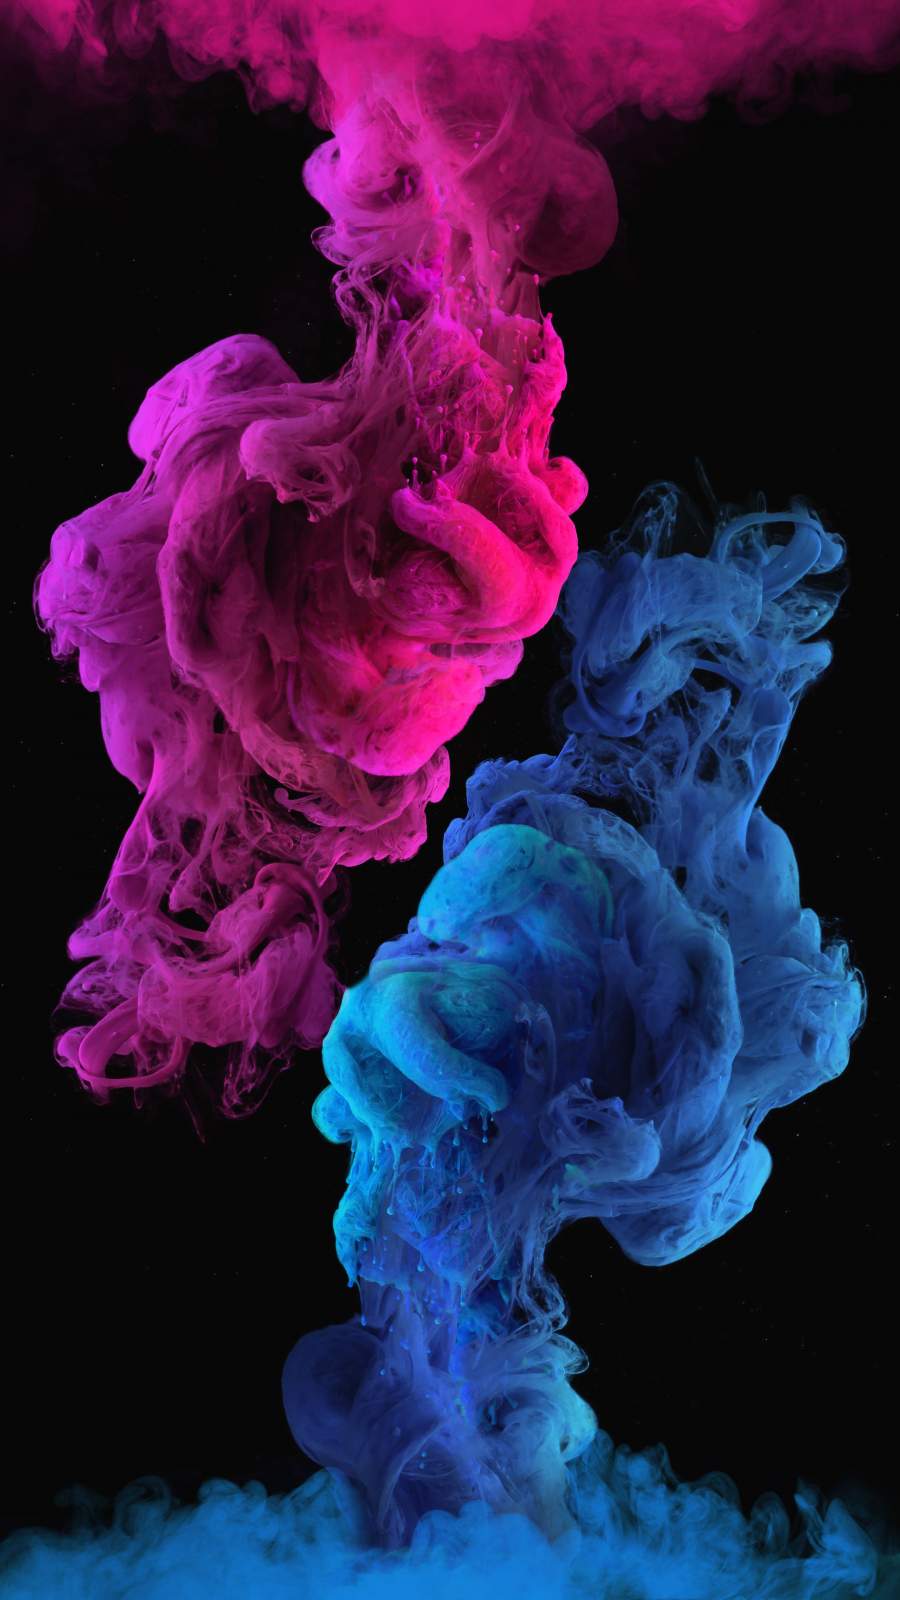 Smoke Bomb - IPhone Wallpapers : iPhone Wallpapers